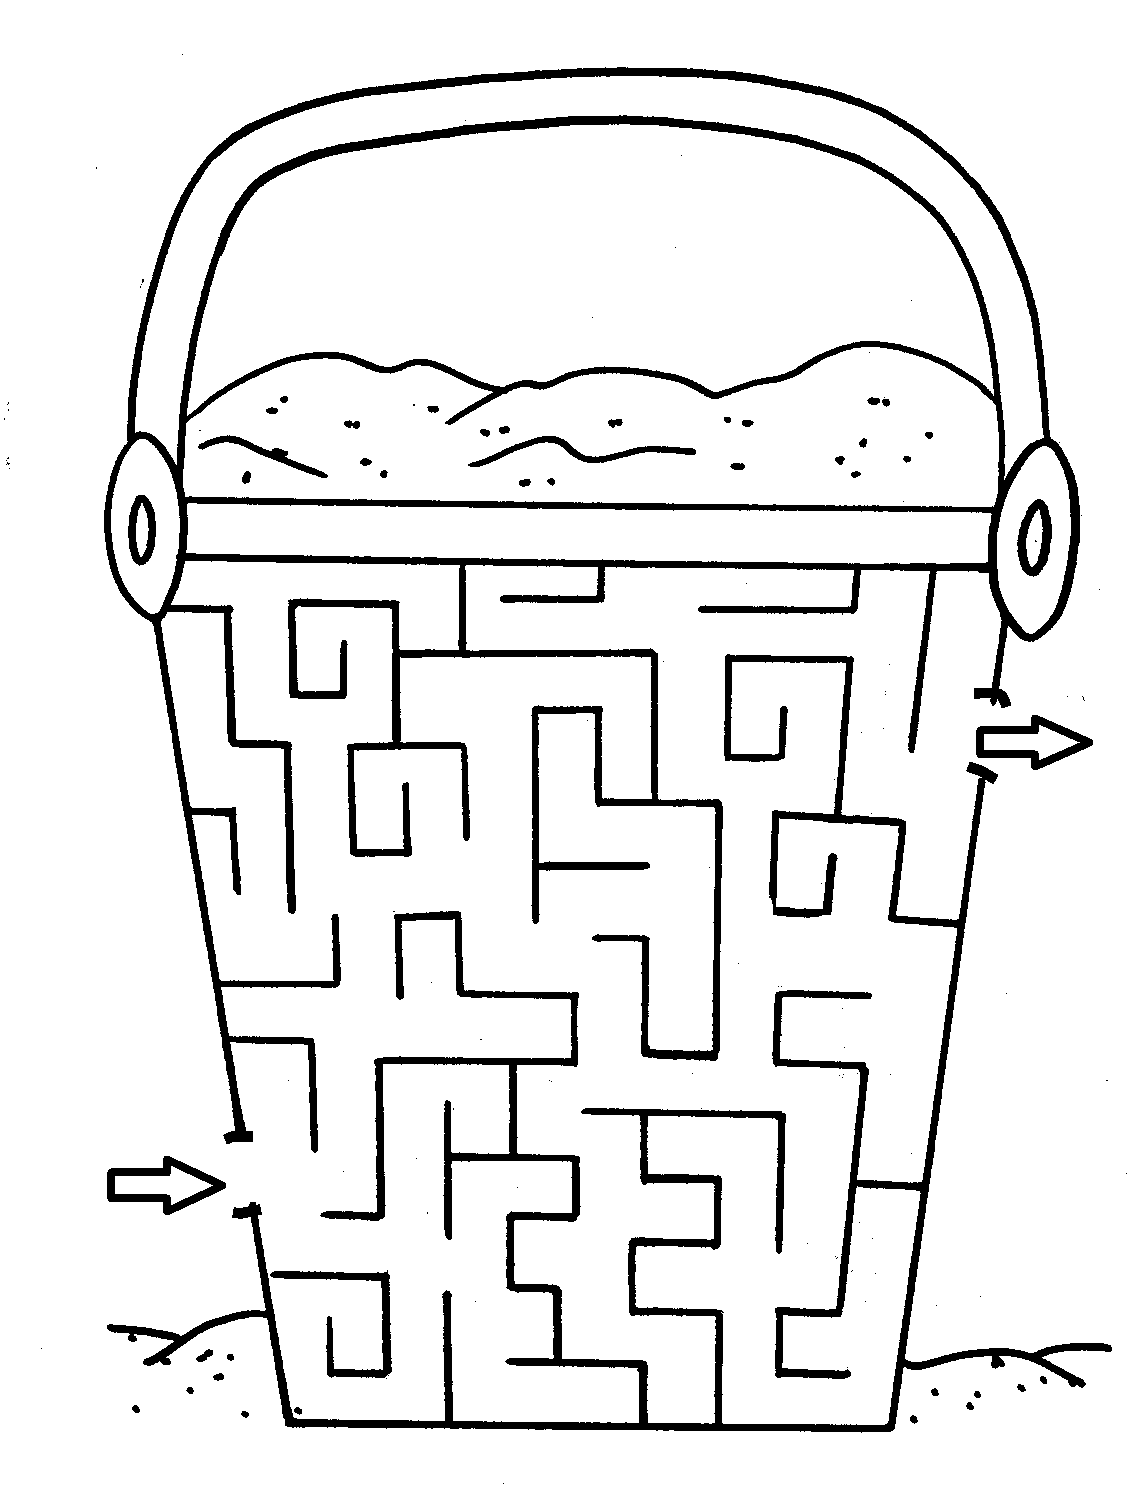 Printable Maze To Color | Free Coloring Pages - Part 4